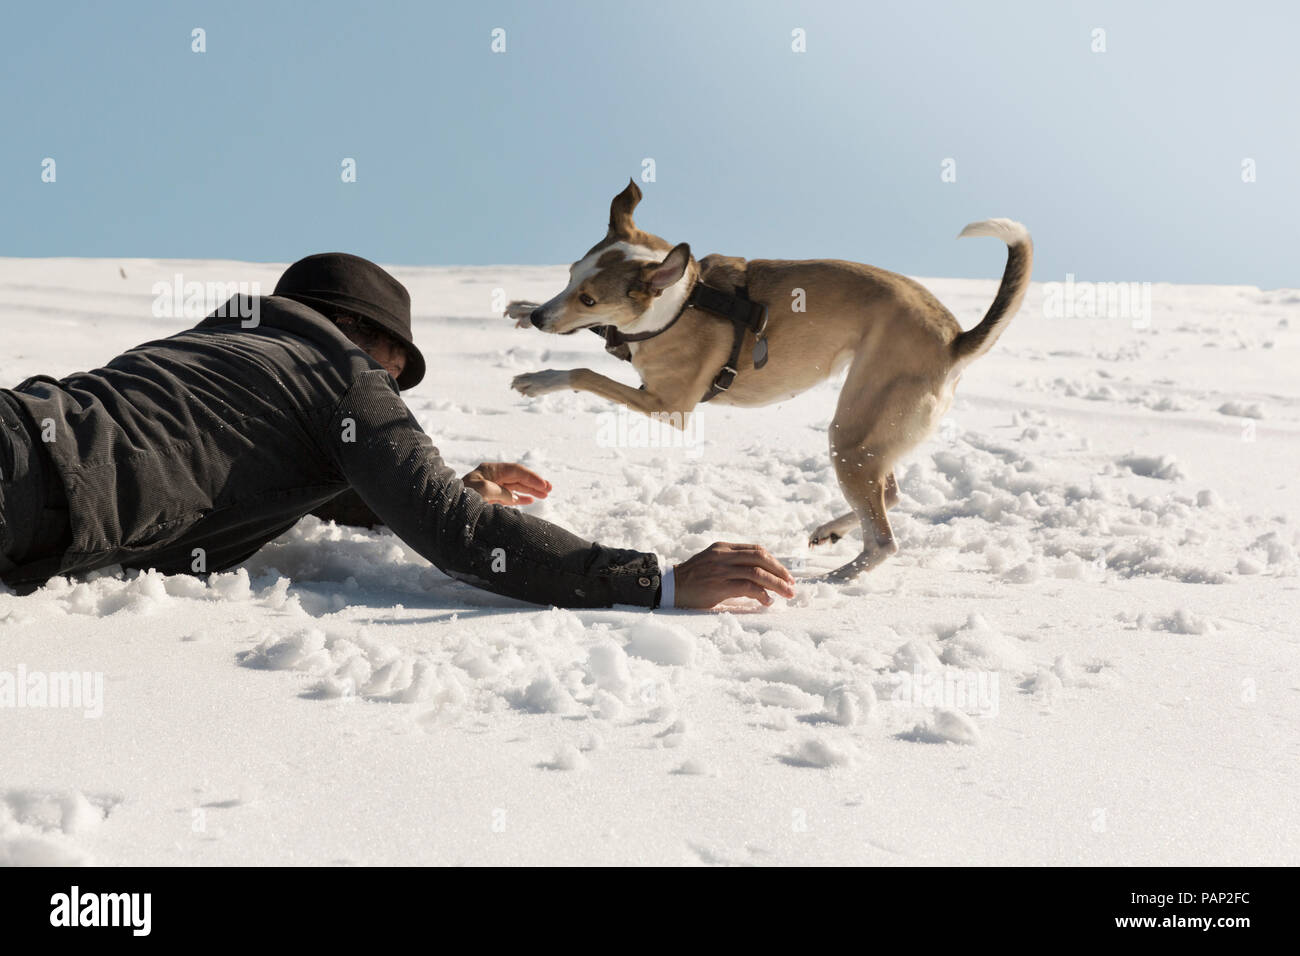 Man Playing with dog in winter, couché sur la neige Banque D'Images